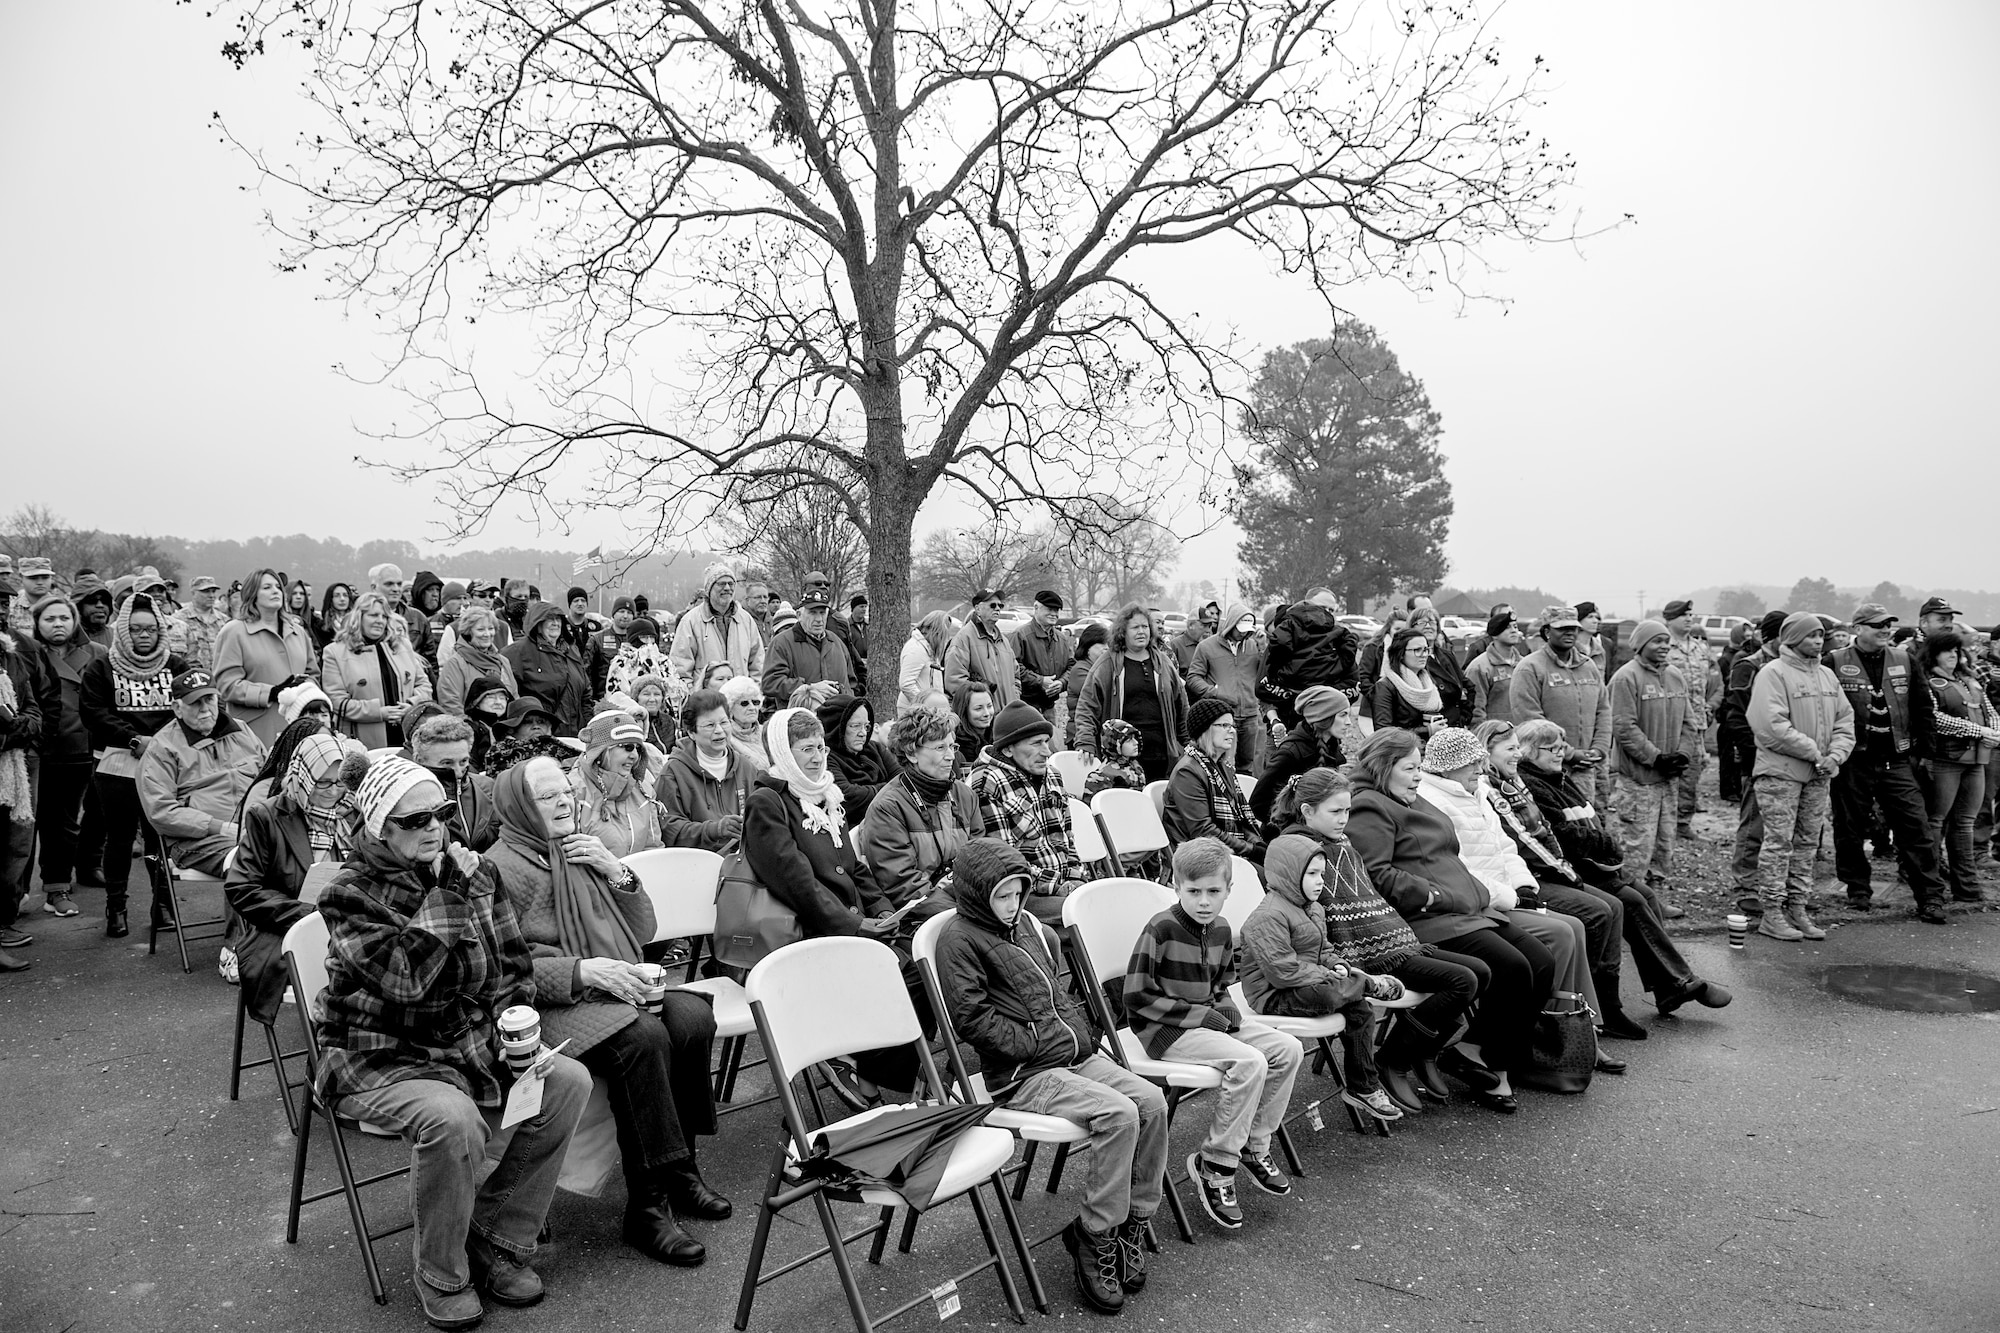 A crowd gathers for a Wreaths Across America ceremony, Dec. 17, 2016, at Evergreen Memorial Cemetery in Princeton, North Carolina. More than 250 people attended the Wreaths Across America ceremony where about 500 wreaths were laid. (U.S. Air Force photo by Airman Shawna L. Keyes)